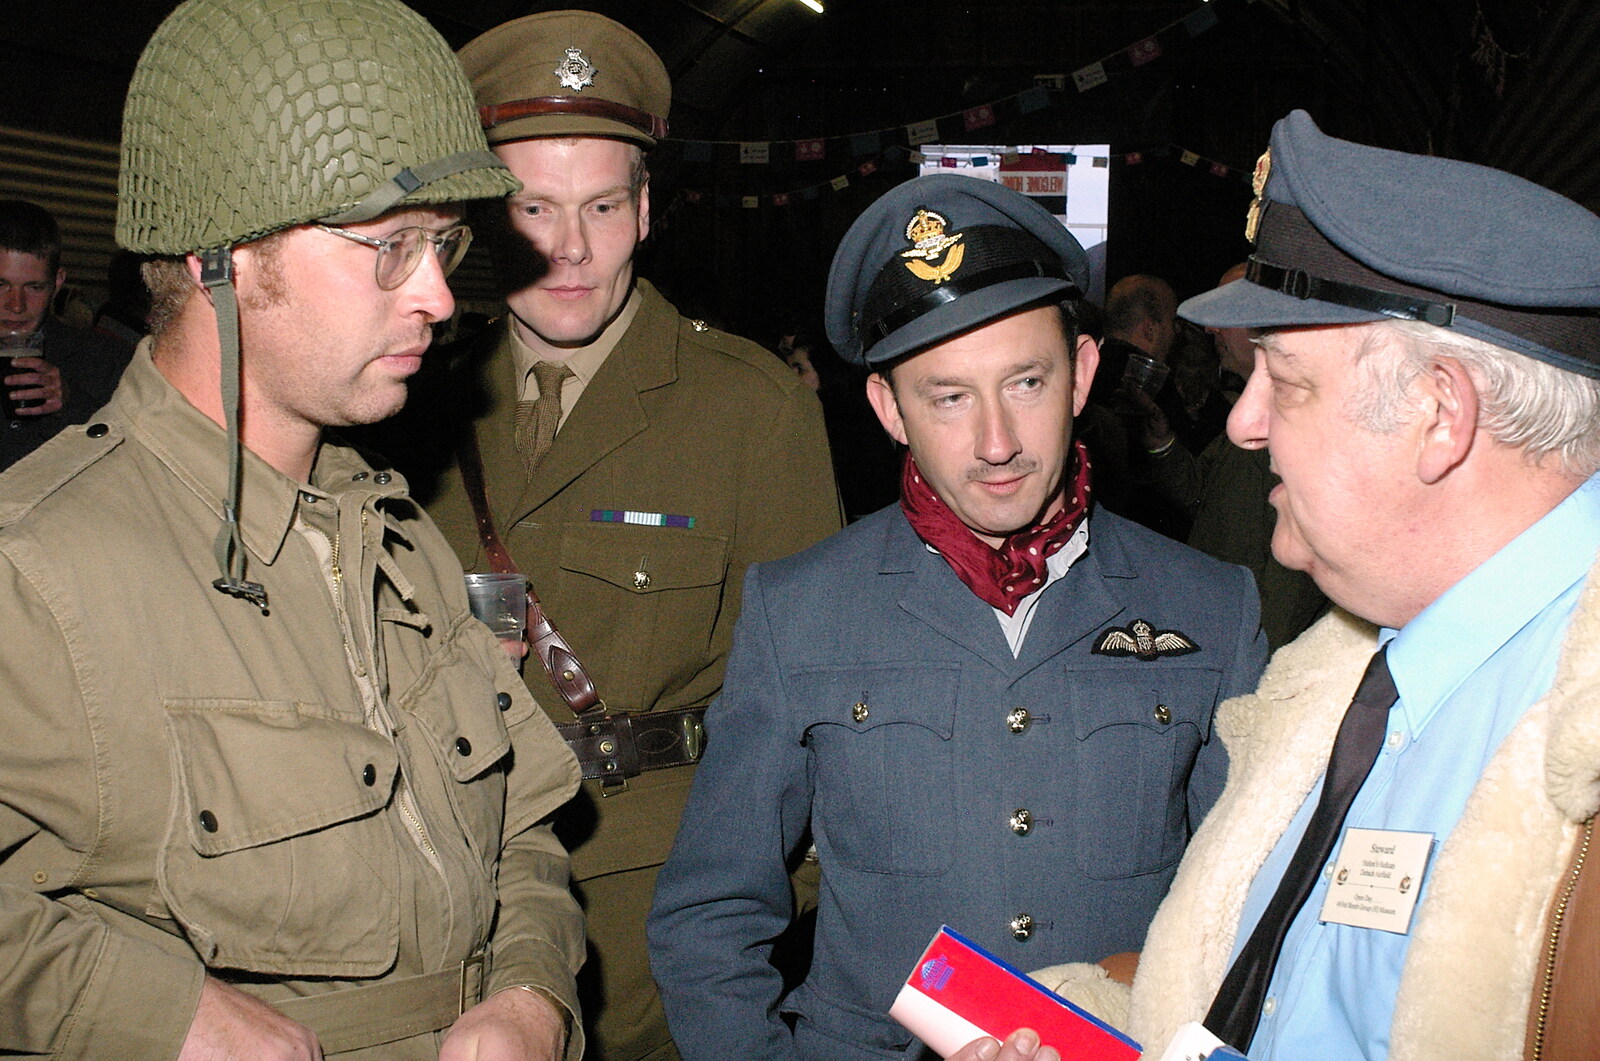 Marc, Bill and DH chat to one of the wardens from A 1940s VE Dance At Debach Airfield, Debach, Suffolk - 11th June 2005